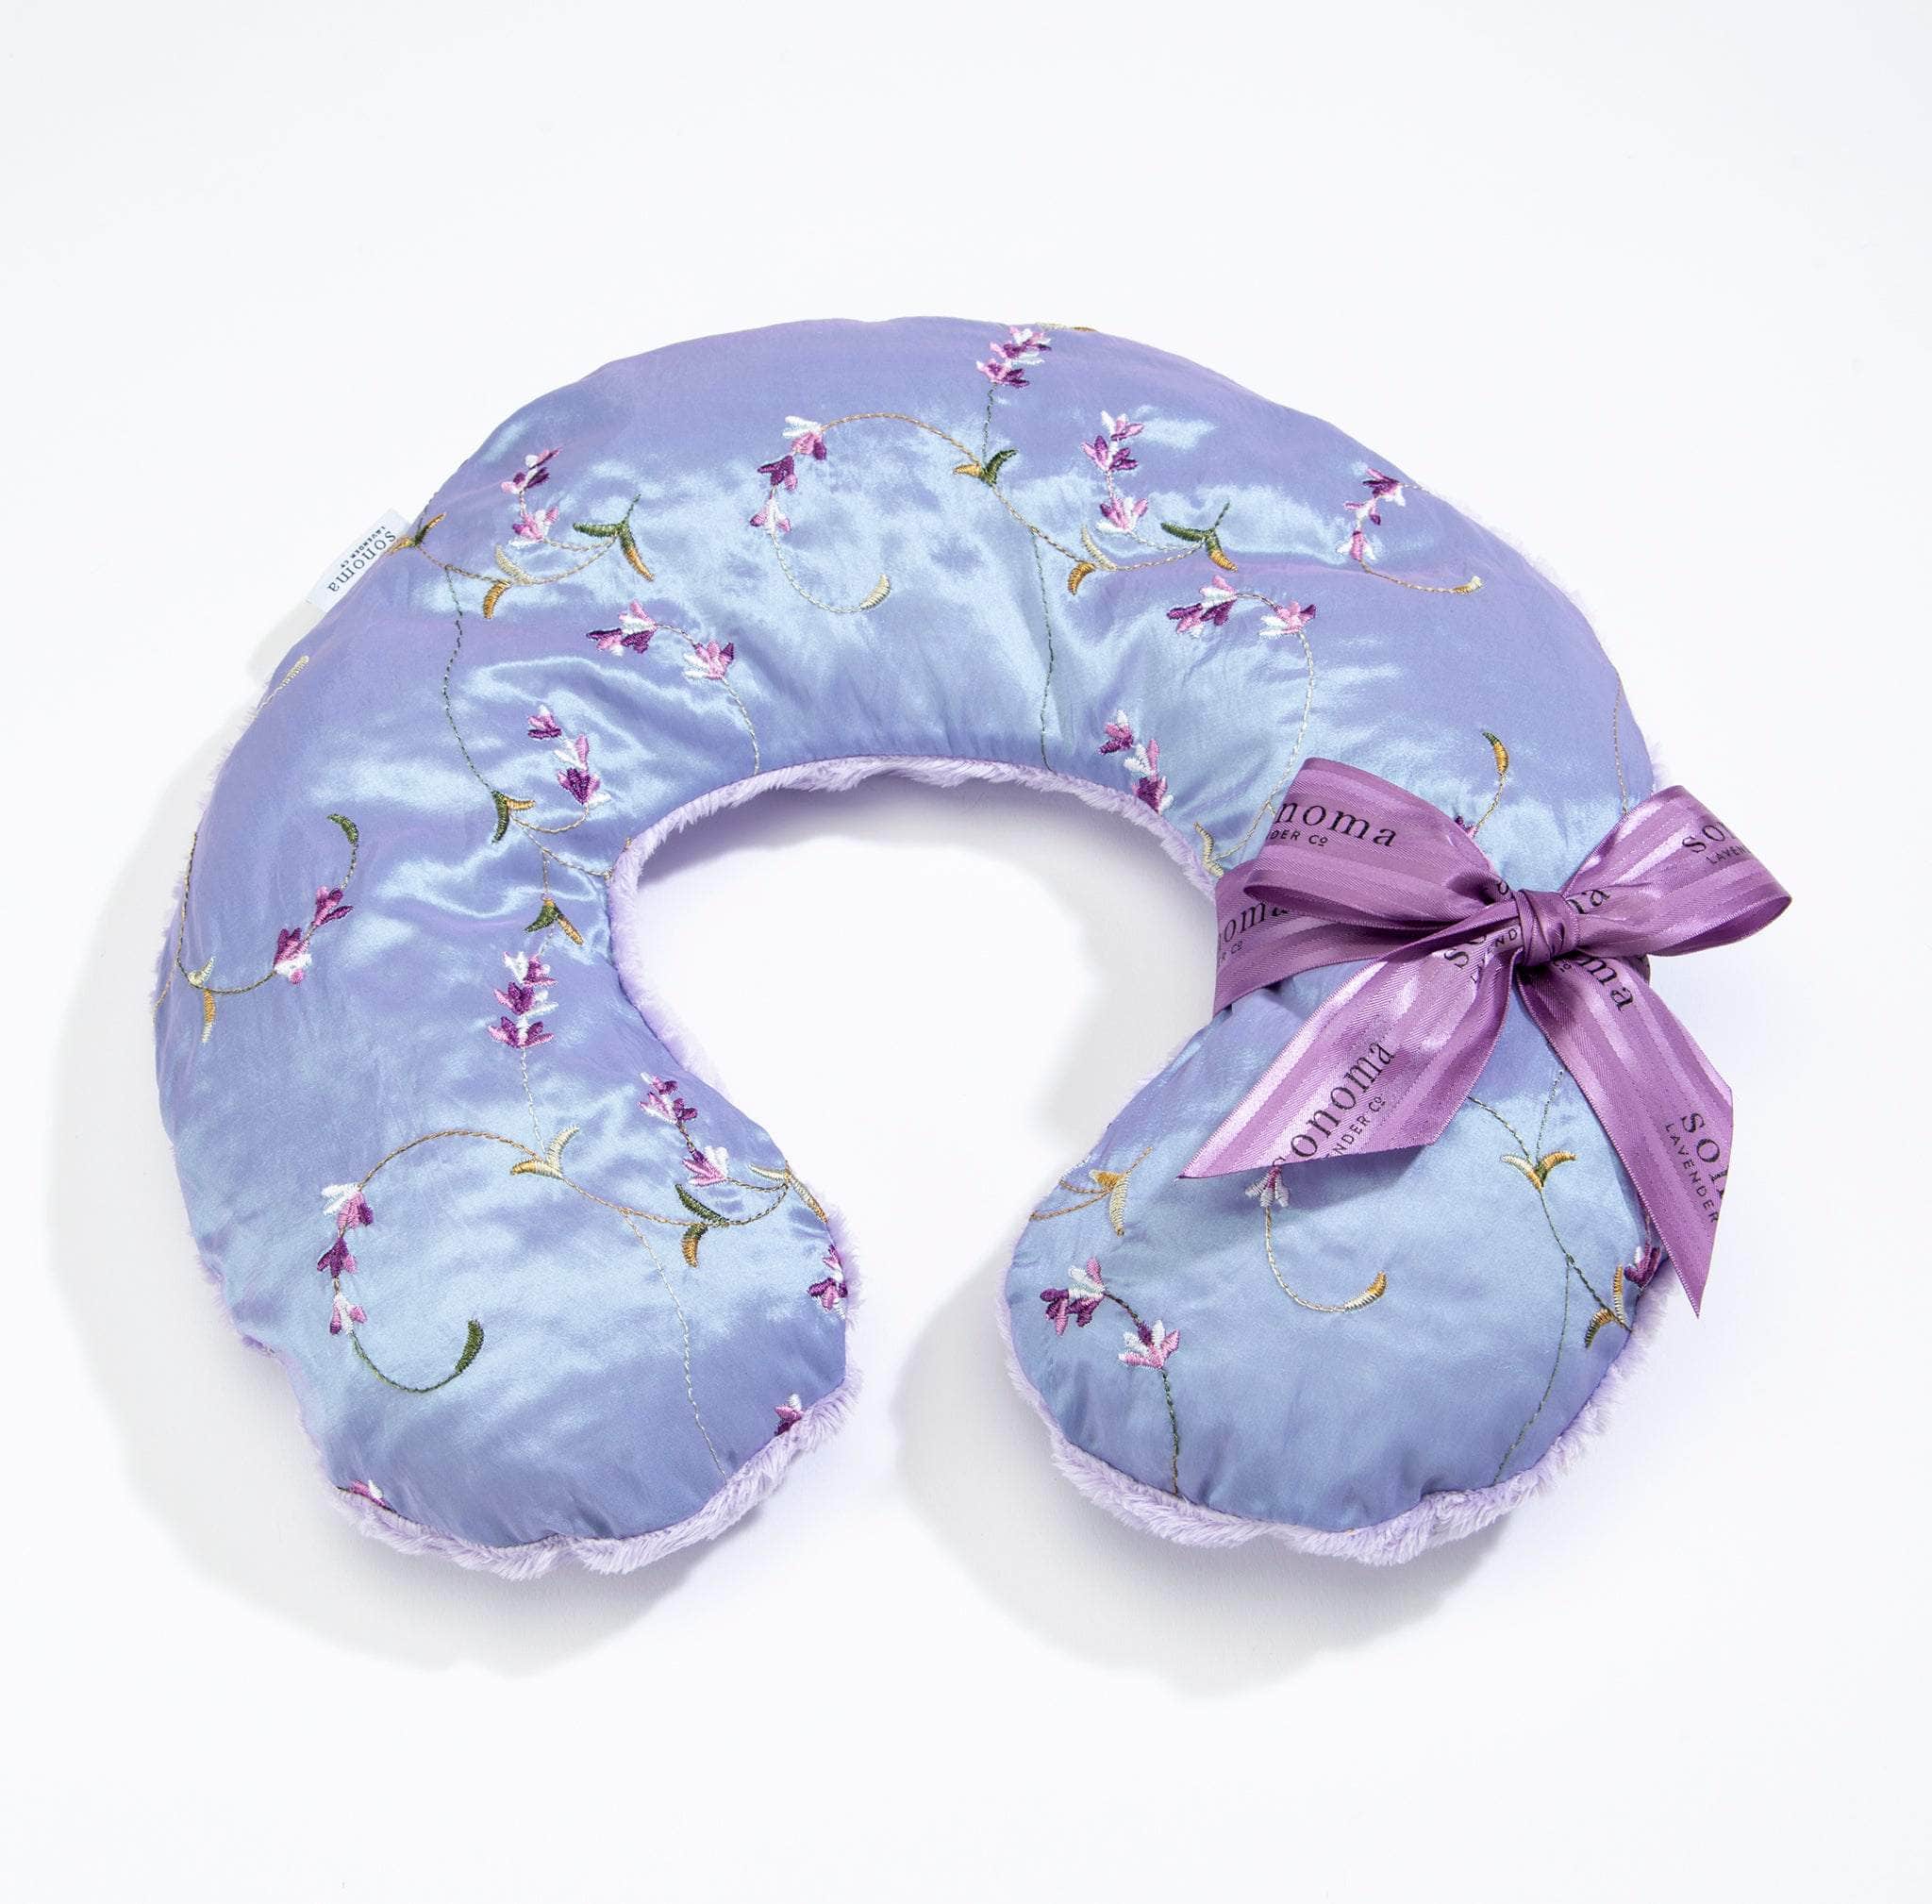 Lavender Spa Neck Pillow with Embroidered Lilac Cuffs